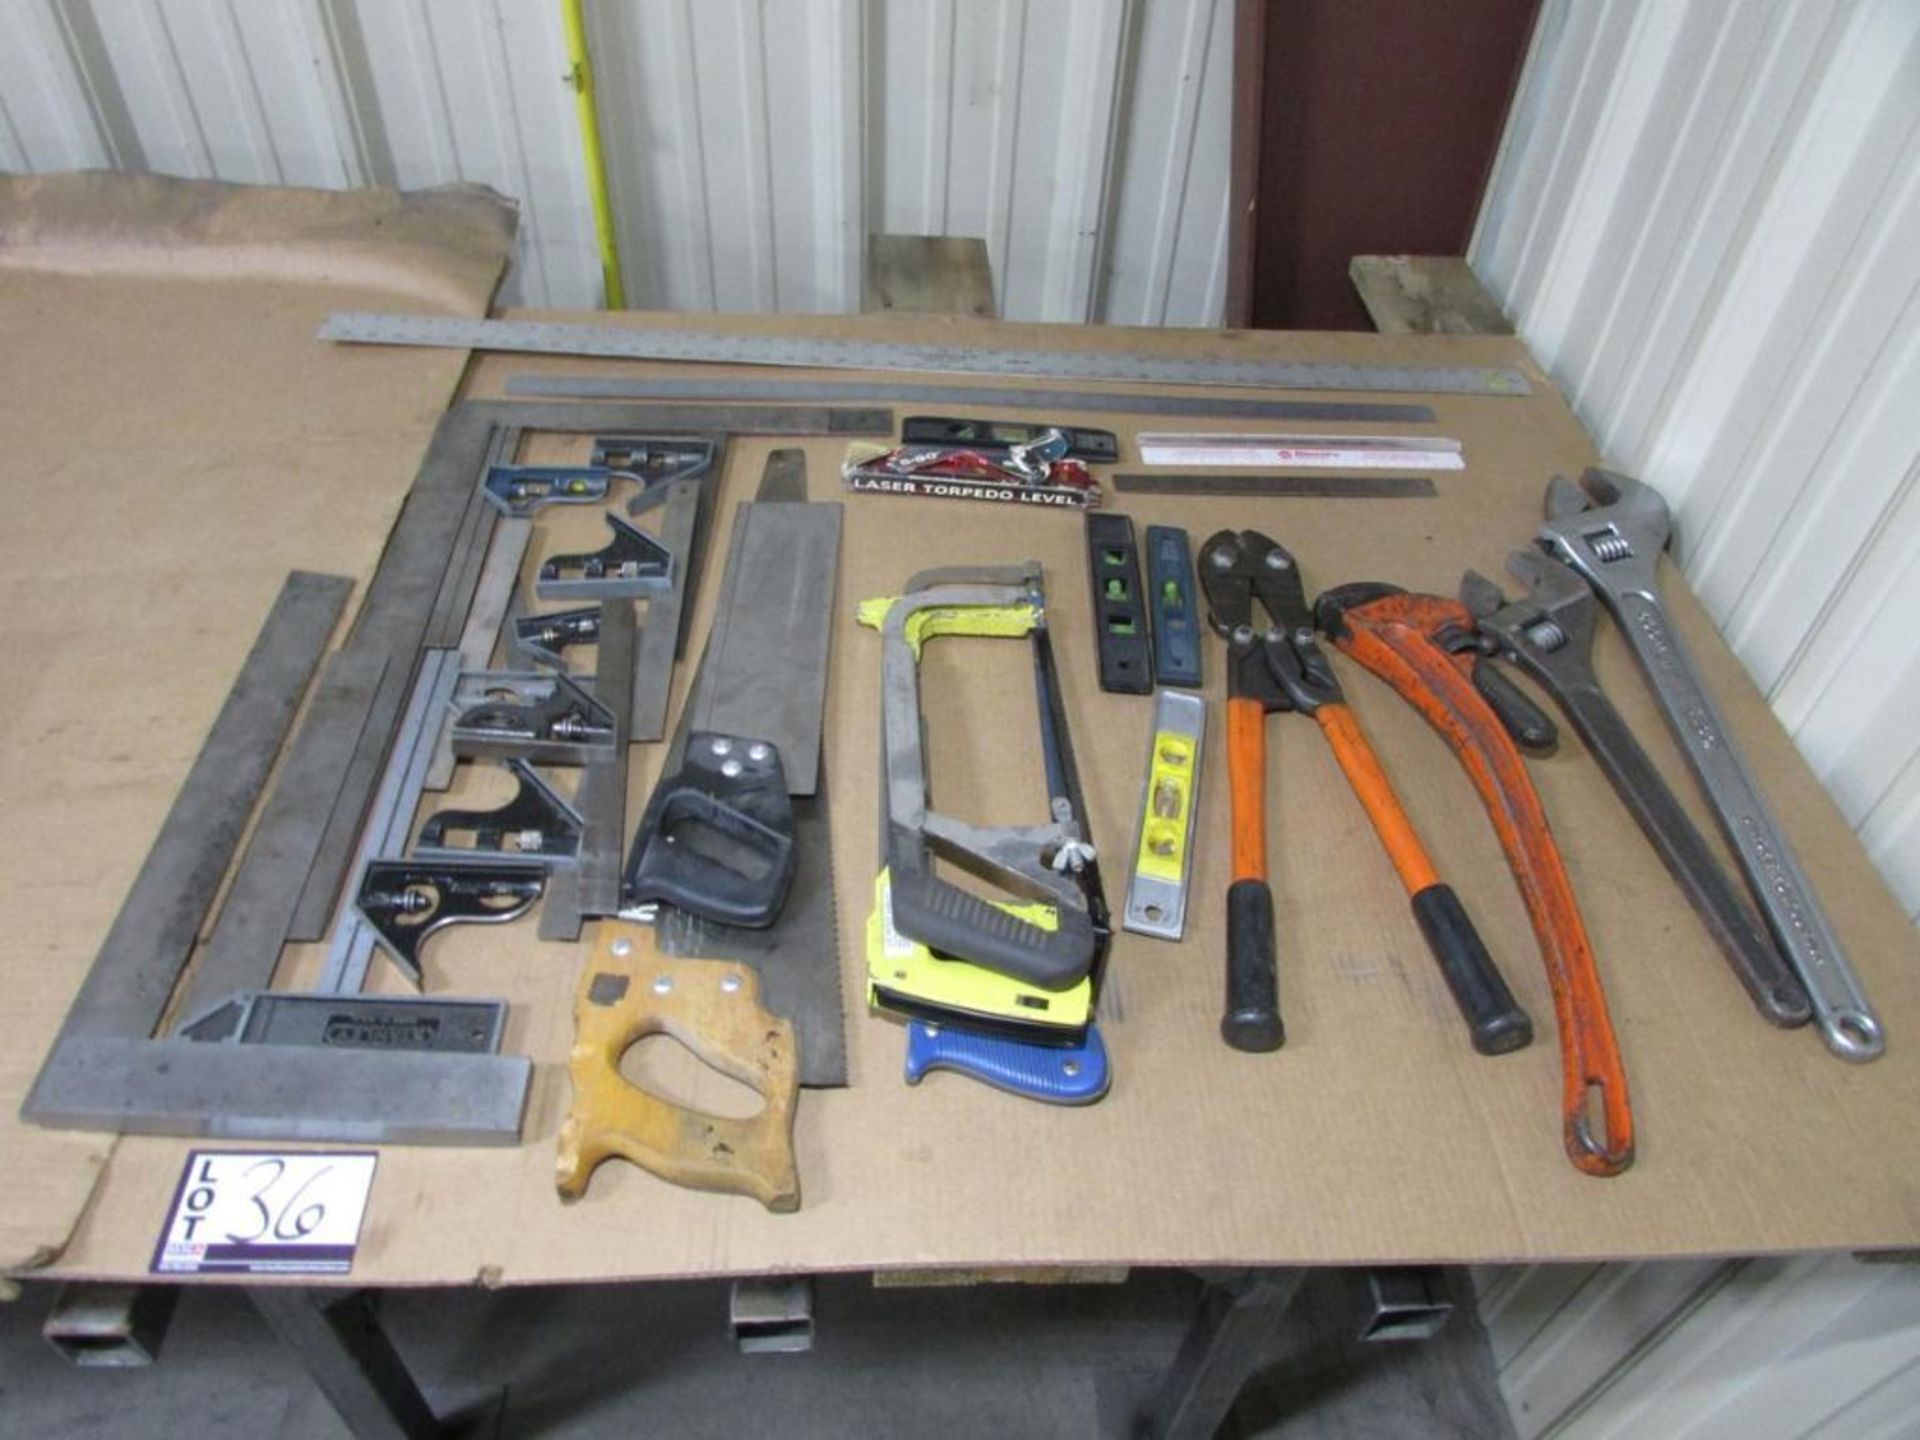 Assorted Hand Tools: Ruler, leveler, Squares, Saws, Compression tool, Adjustable Wrenches, and Pipe